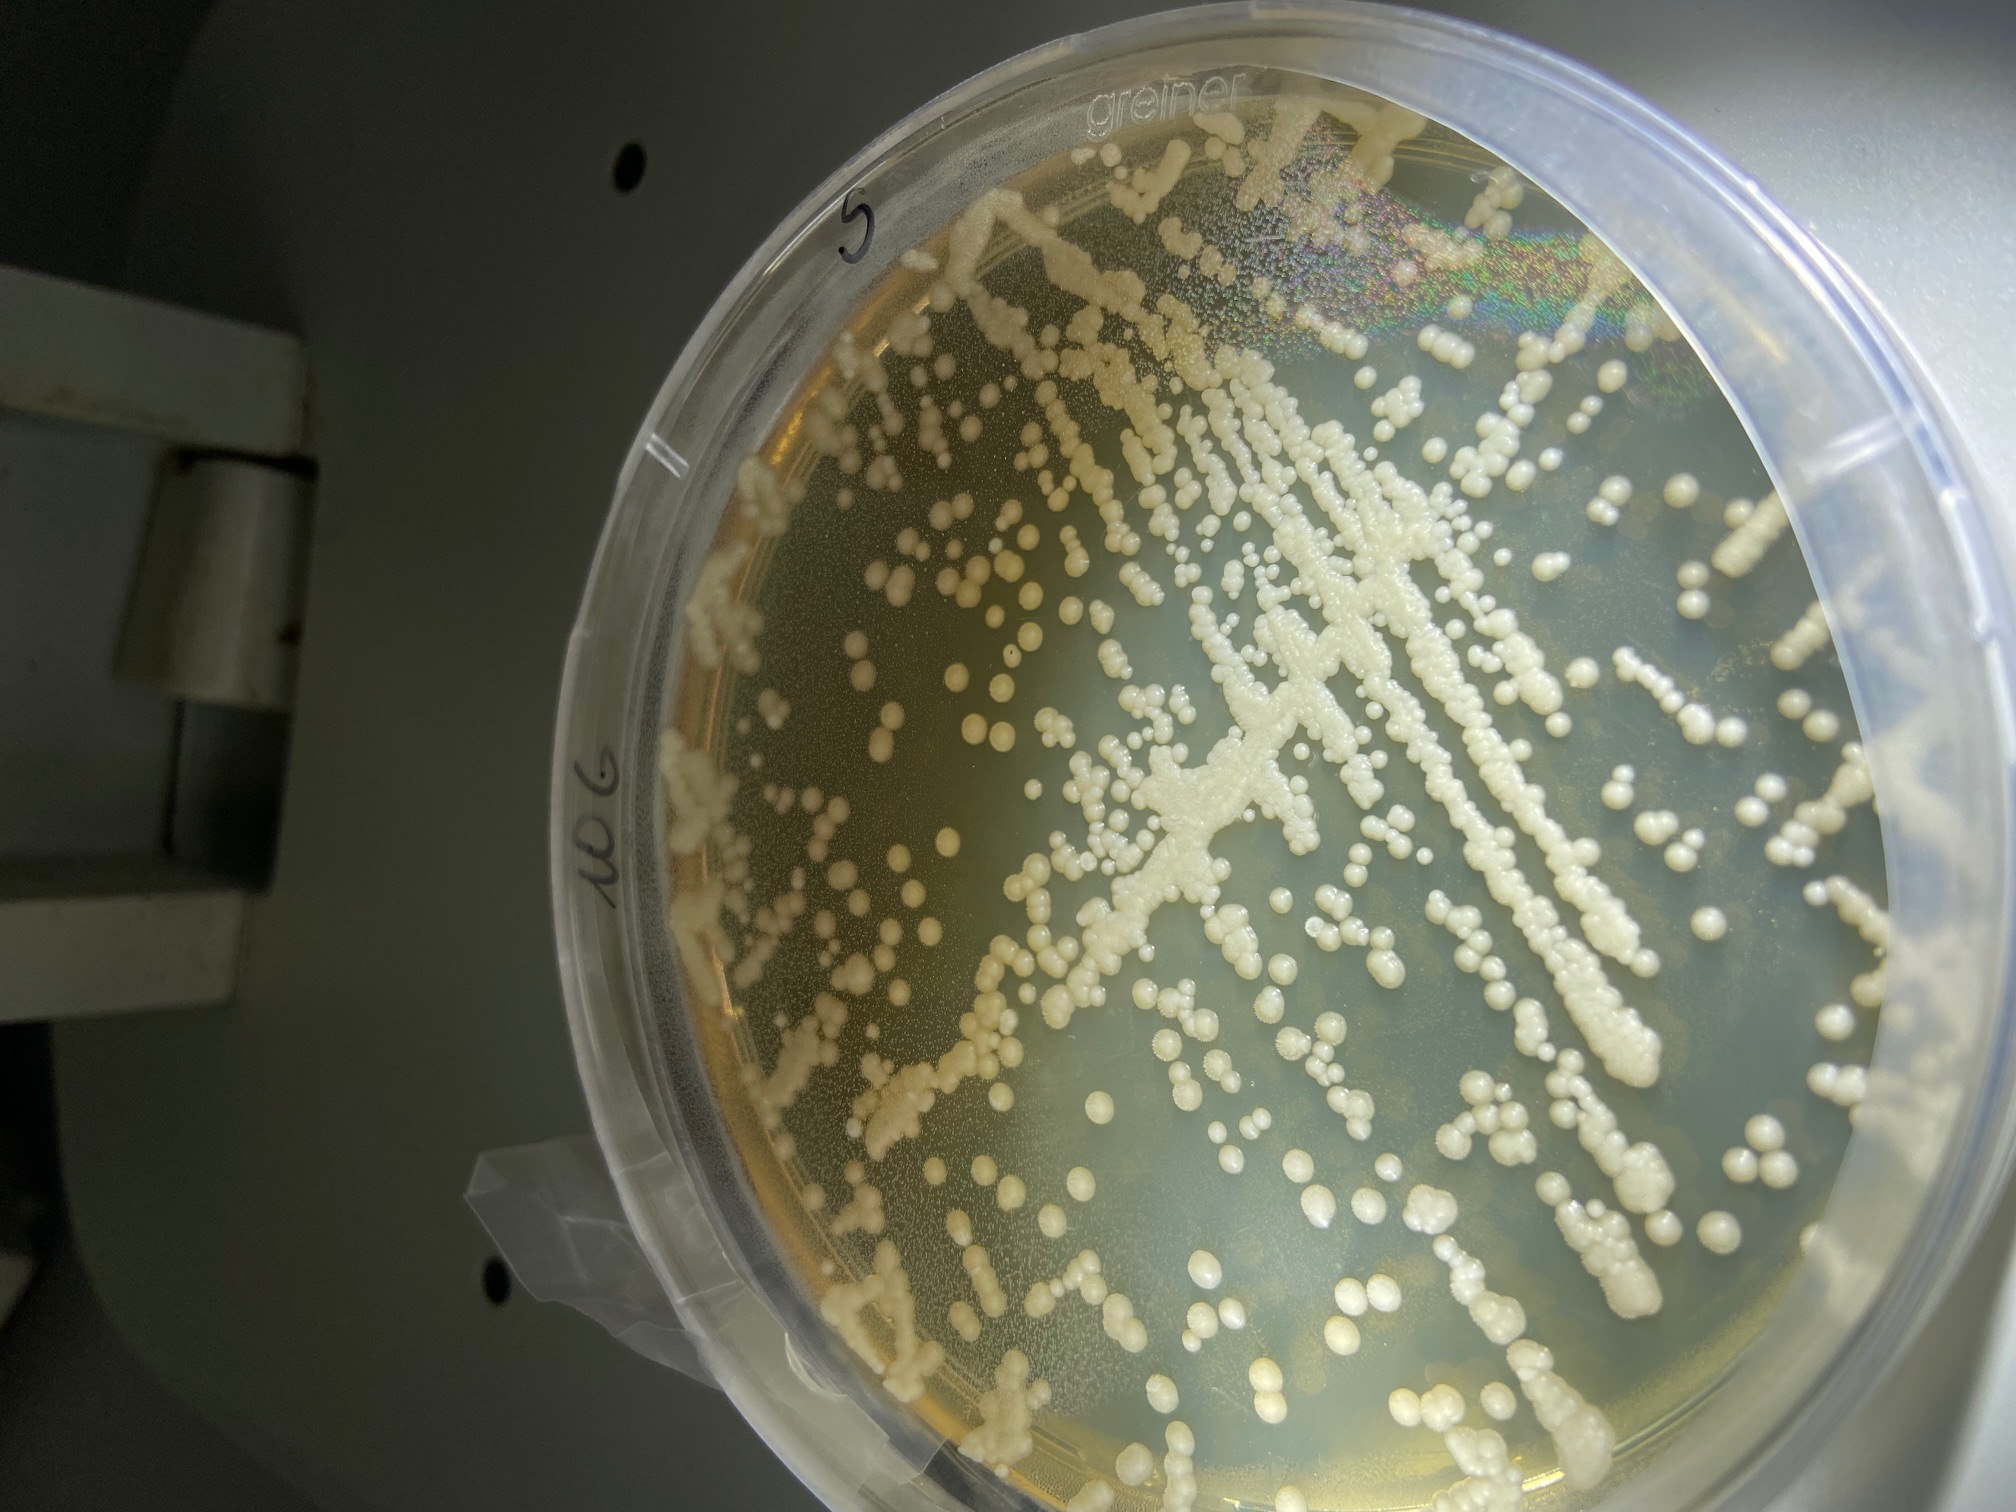 We cultivate oil-degrading microorganisms in the laboratory